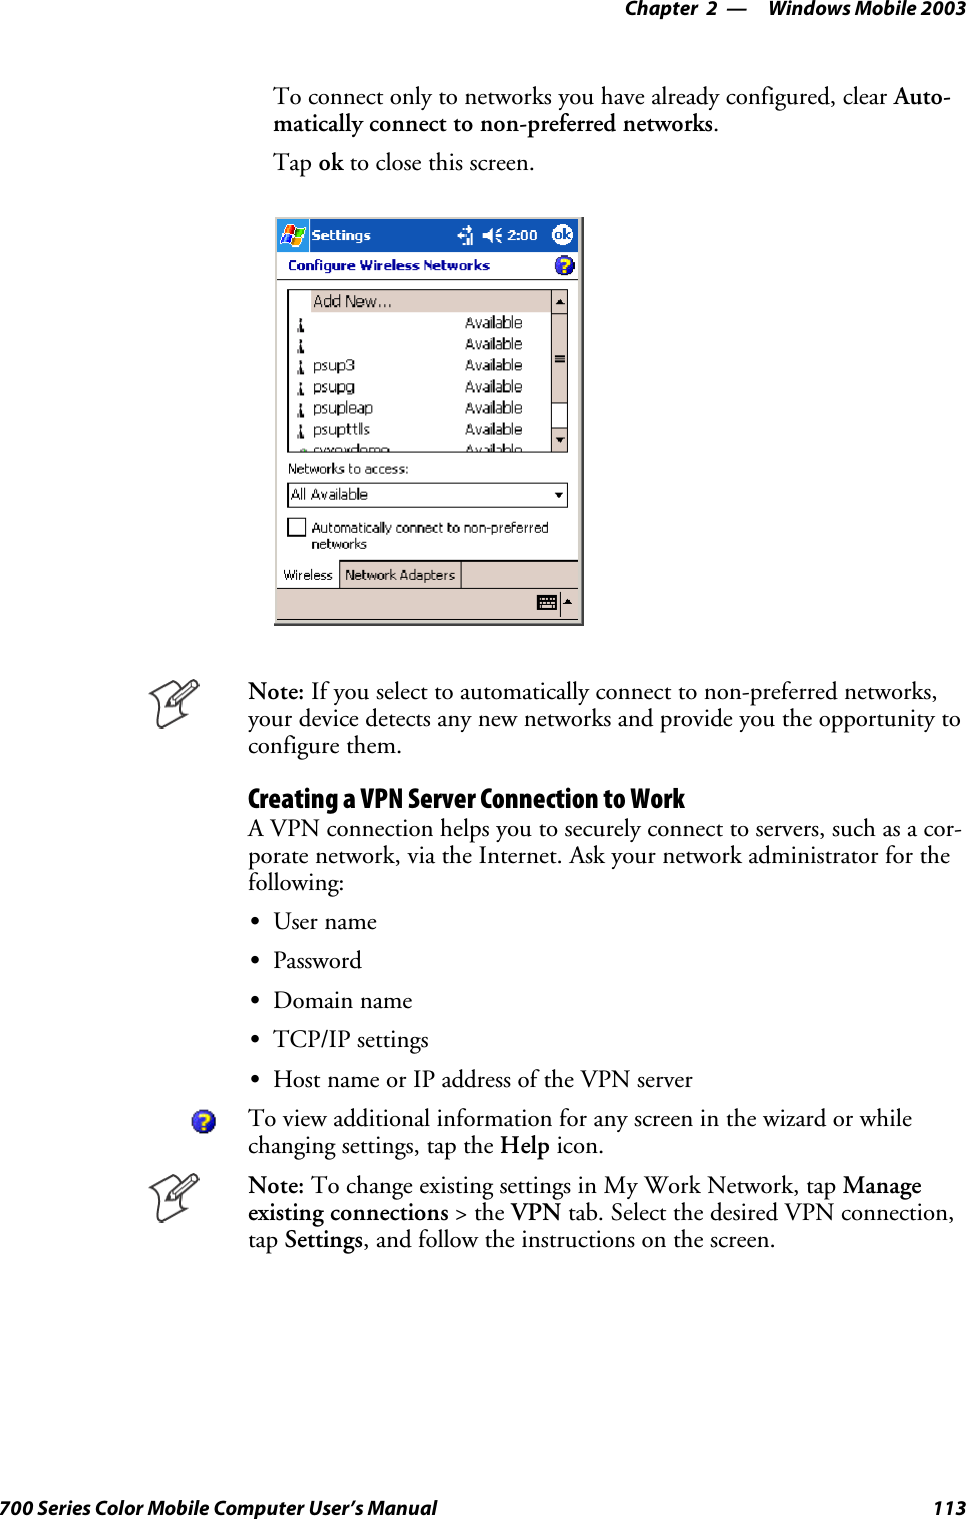 Windows Mobile 2003—Chapter 2113700 Series Color Mobile Computer User’s ManualTo connect only to networks you have already configured, clear Auto-matically connect to non-preferred networks.Tap ok to close this screen.Note: If you select to automatically connect to non-preferred networks,your device detects any new networks and provide you the opportunity toconfigure them.Creating a VPN Server Connection to WorkA VPN connection helps you to securely connect to servers, such as a cor-porate network, via the Internet. Ask your network administrator for thefollowing:SUser nameSPasswordSDomain nameSTCP/IP settingsSHost name or IP address of the VPN serverTo view additional information for any screen in the wizard or whilechanging settings, tap the Help icon.Note: To change existing settings in My Work Network, tap Manageexisting connections &gt;theVPN tab. Select the desired VPN connection,tap Settings, and follow the instructions on the screen.